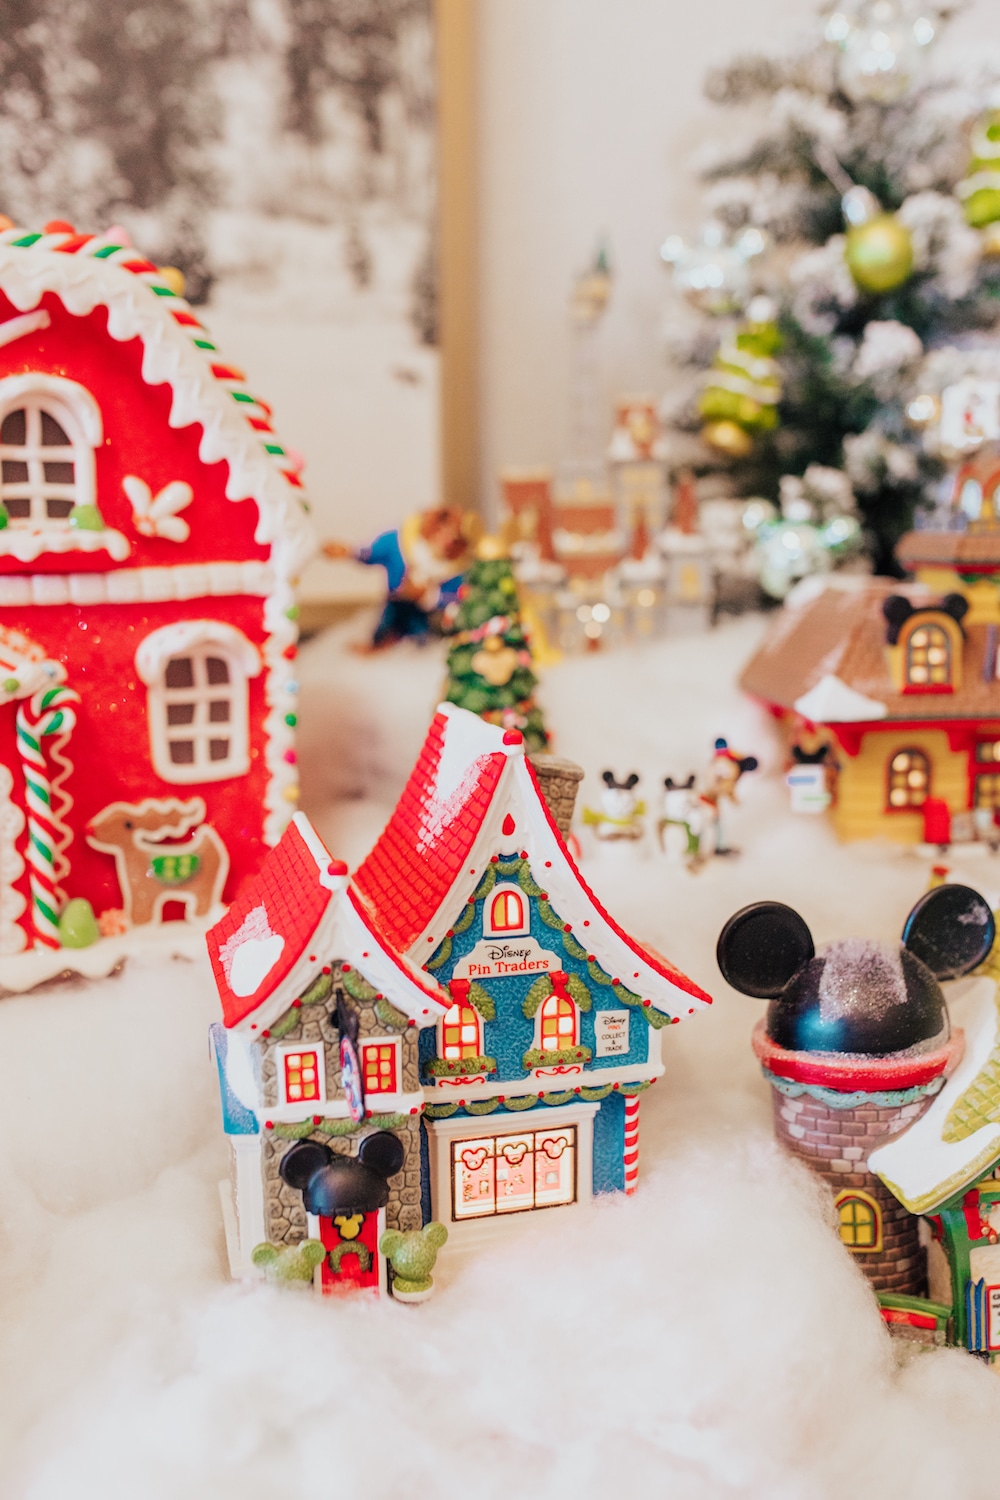 how to create a disney mickey's christmas village display on a table - colorful christmas decor